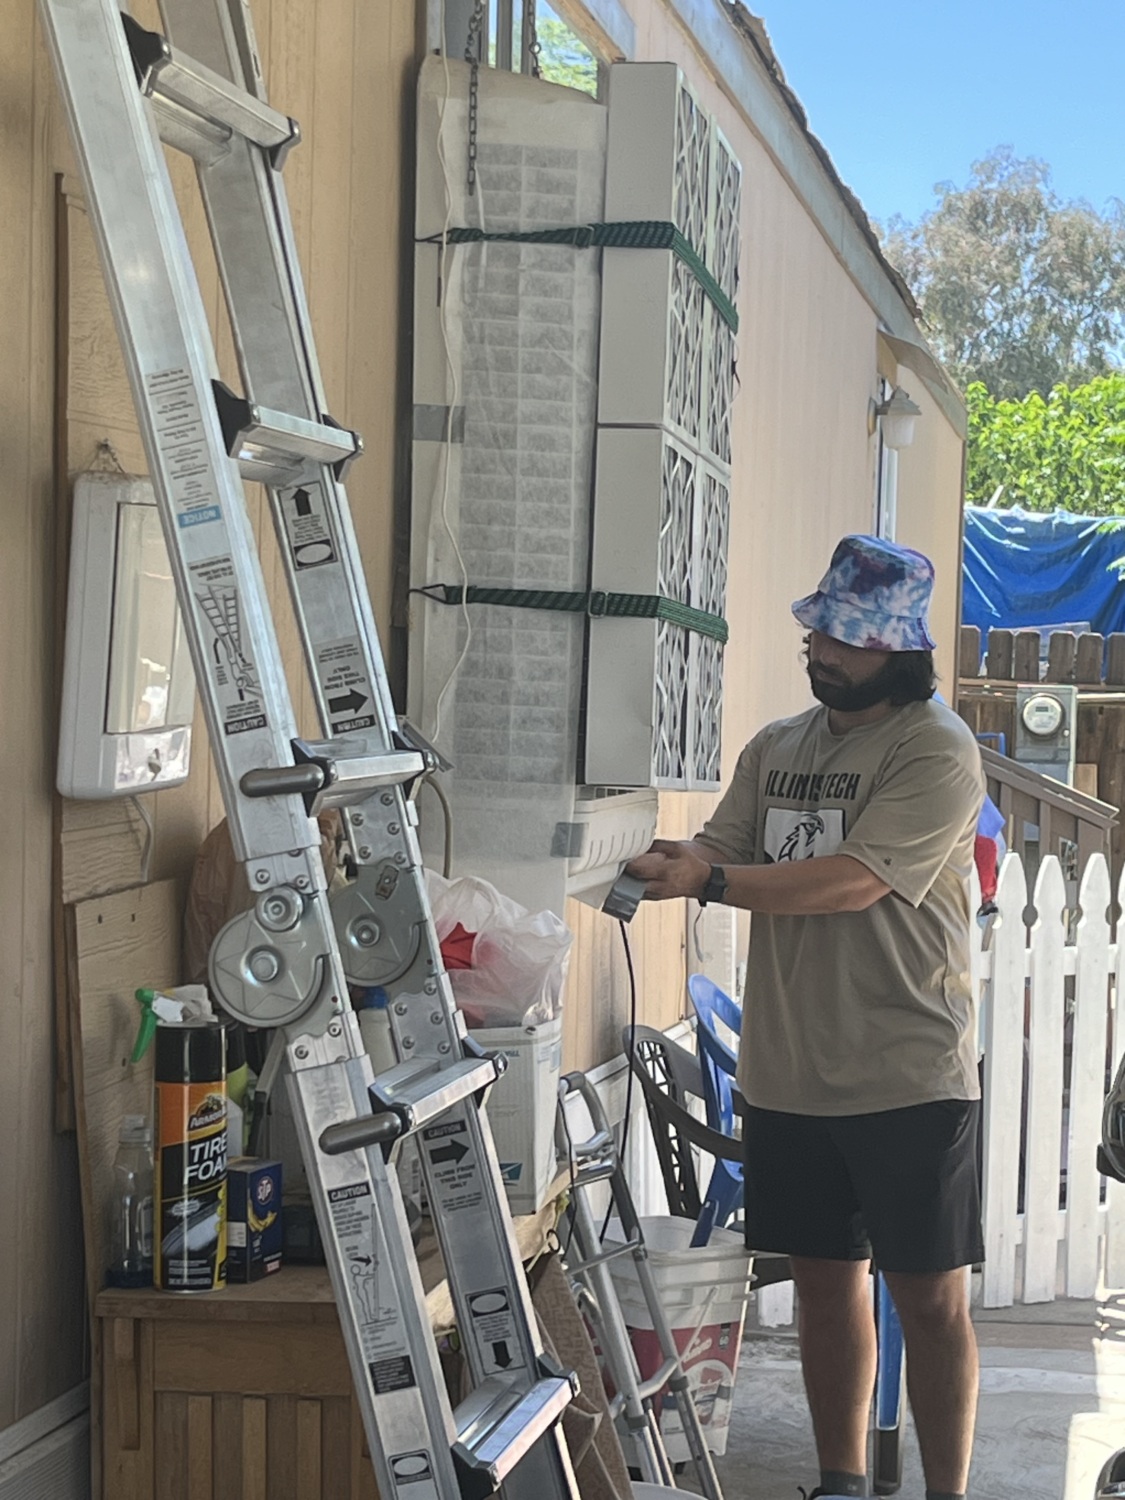 FRESSCA intern installs air filter on a swamp cooler outside a home in Coalinga, CA